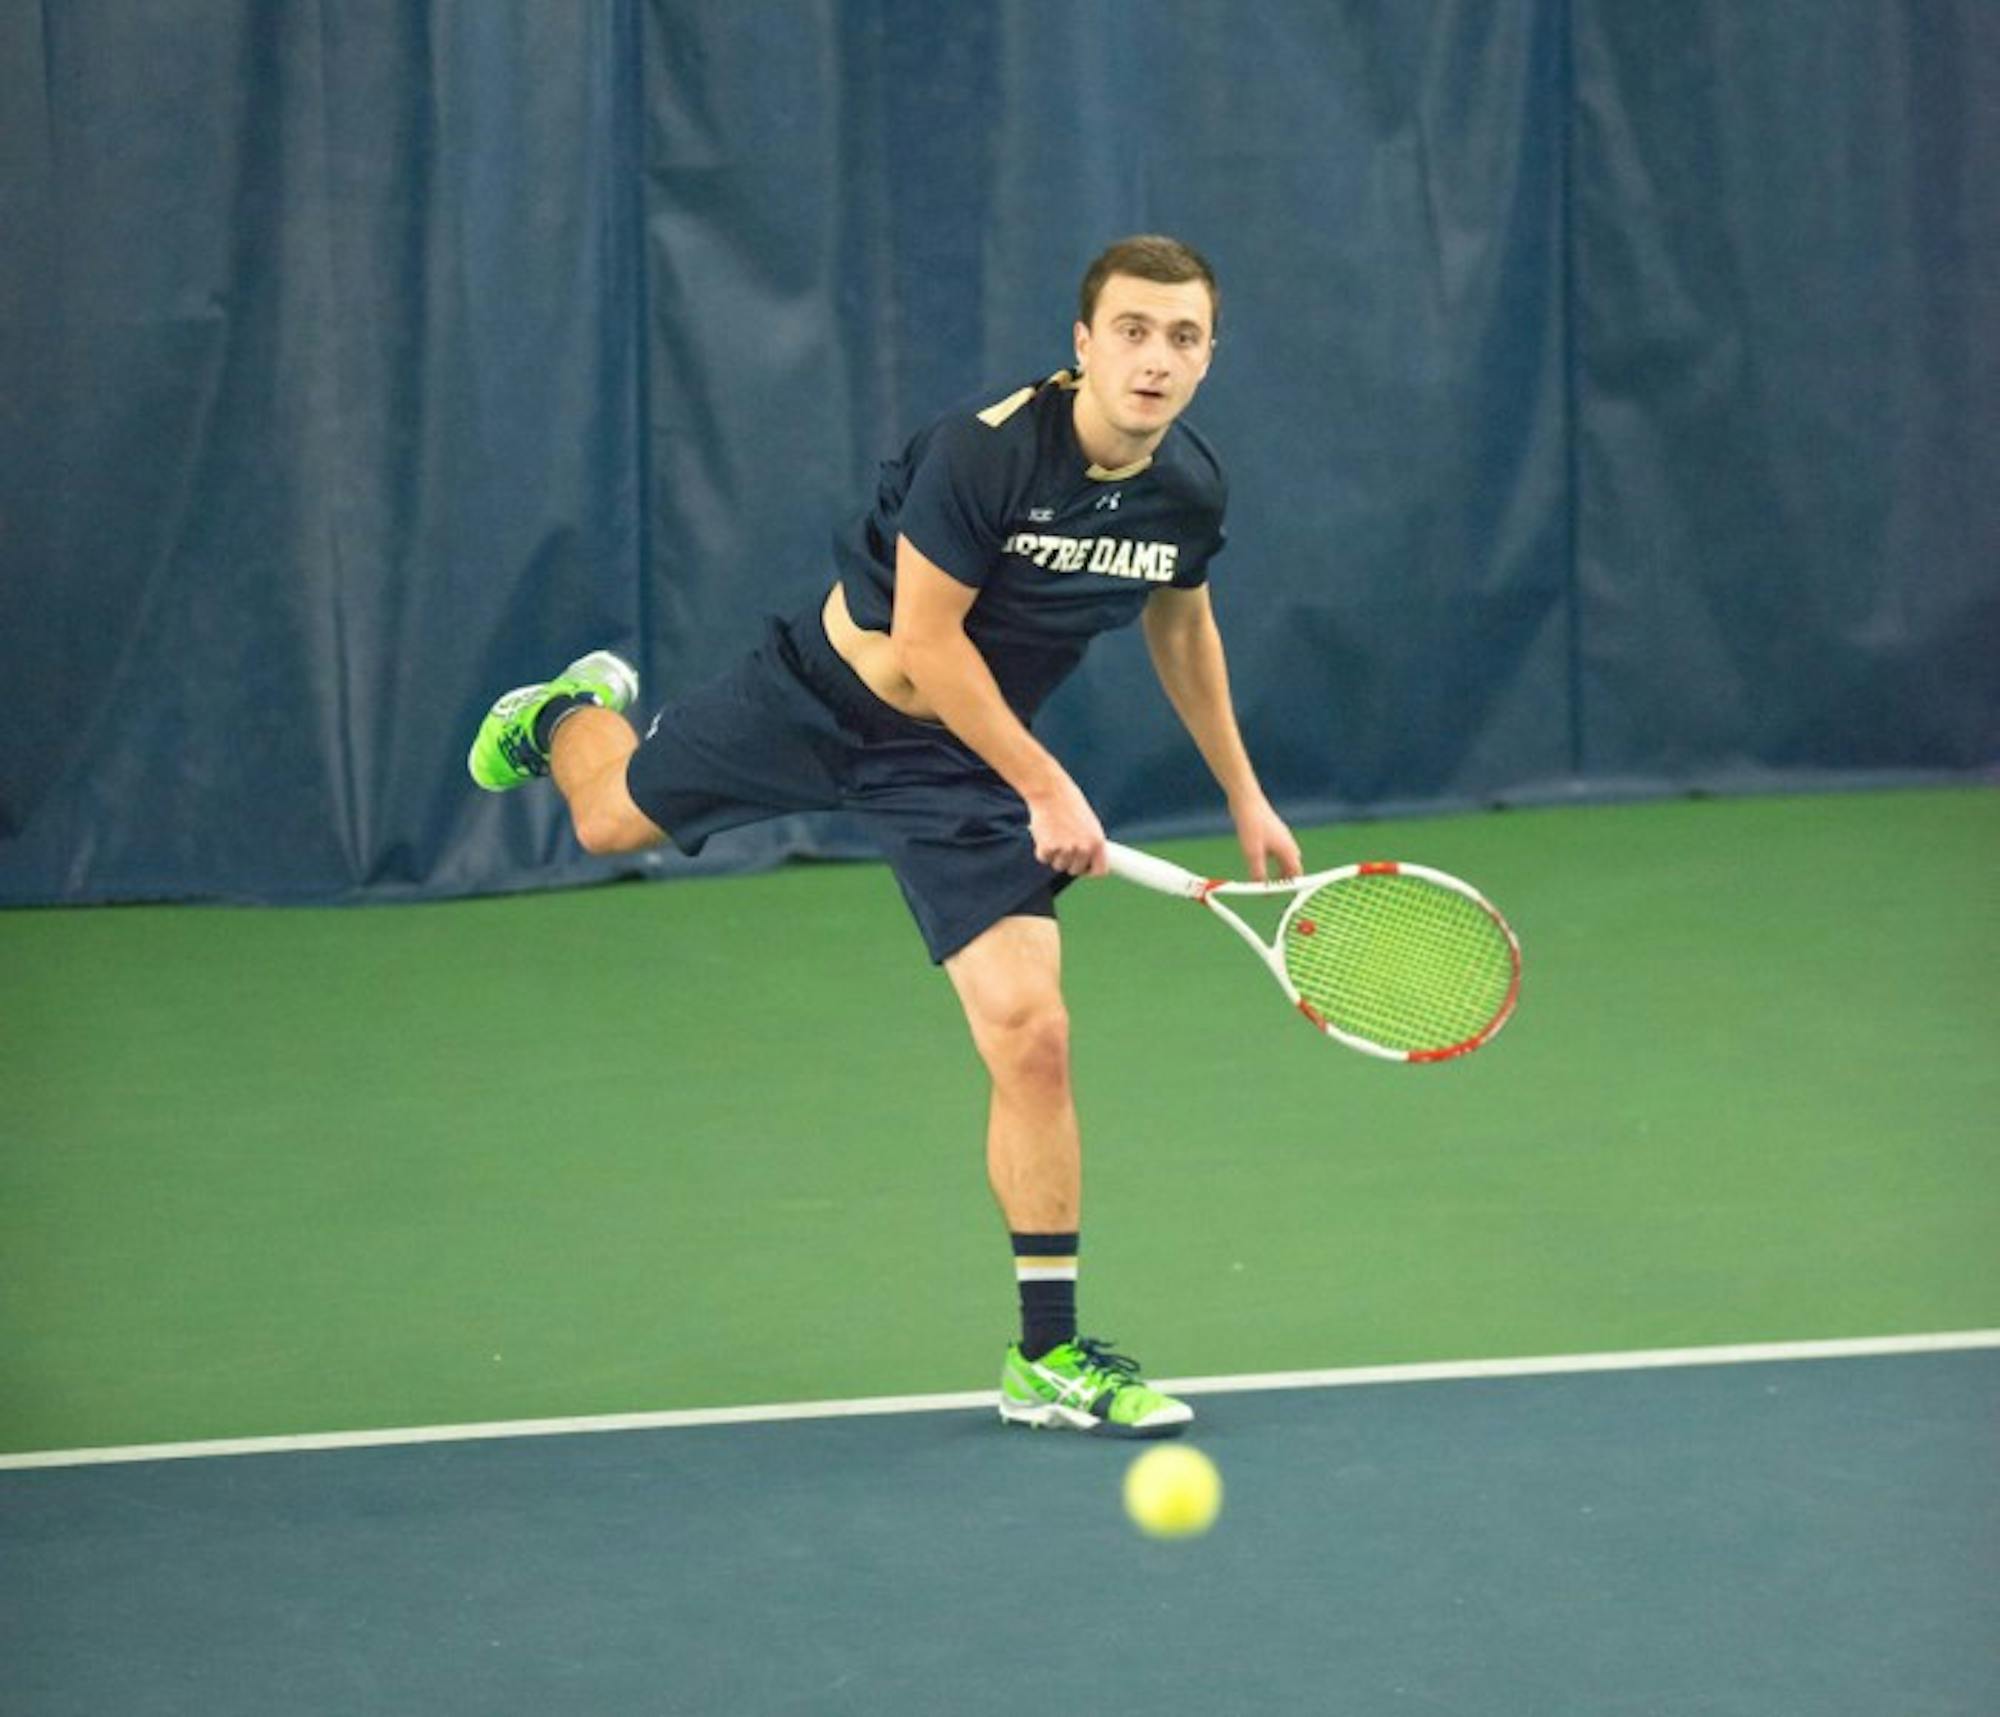 Irish sophomore Eddy Covalschi returns a shot during Notre Dame's 4-3 win over Oklahoma State on Jan. 24 at Eck Tennis Pavilion.